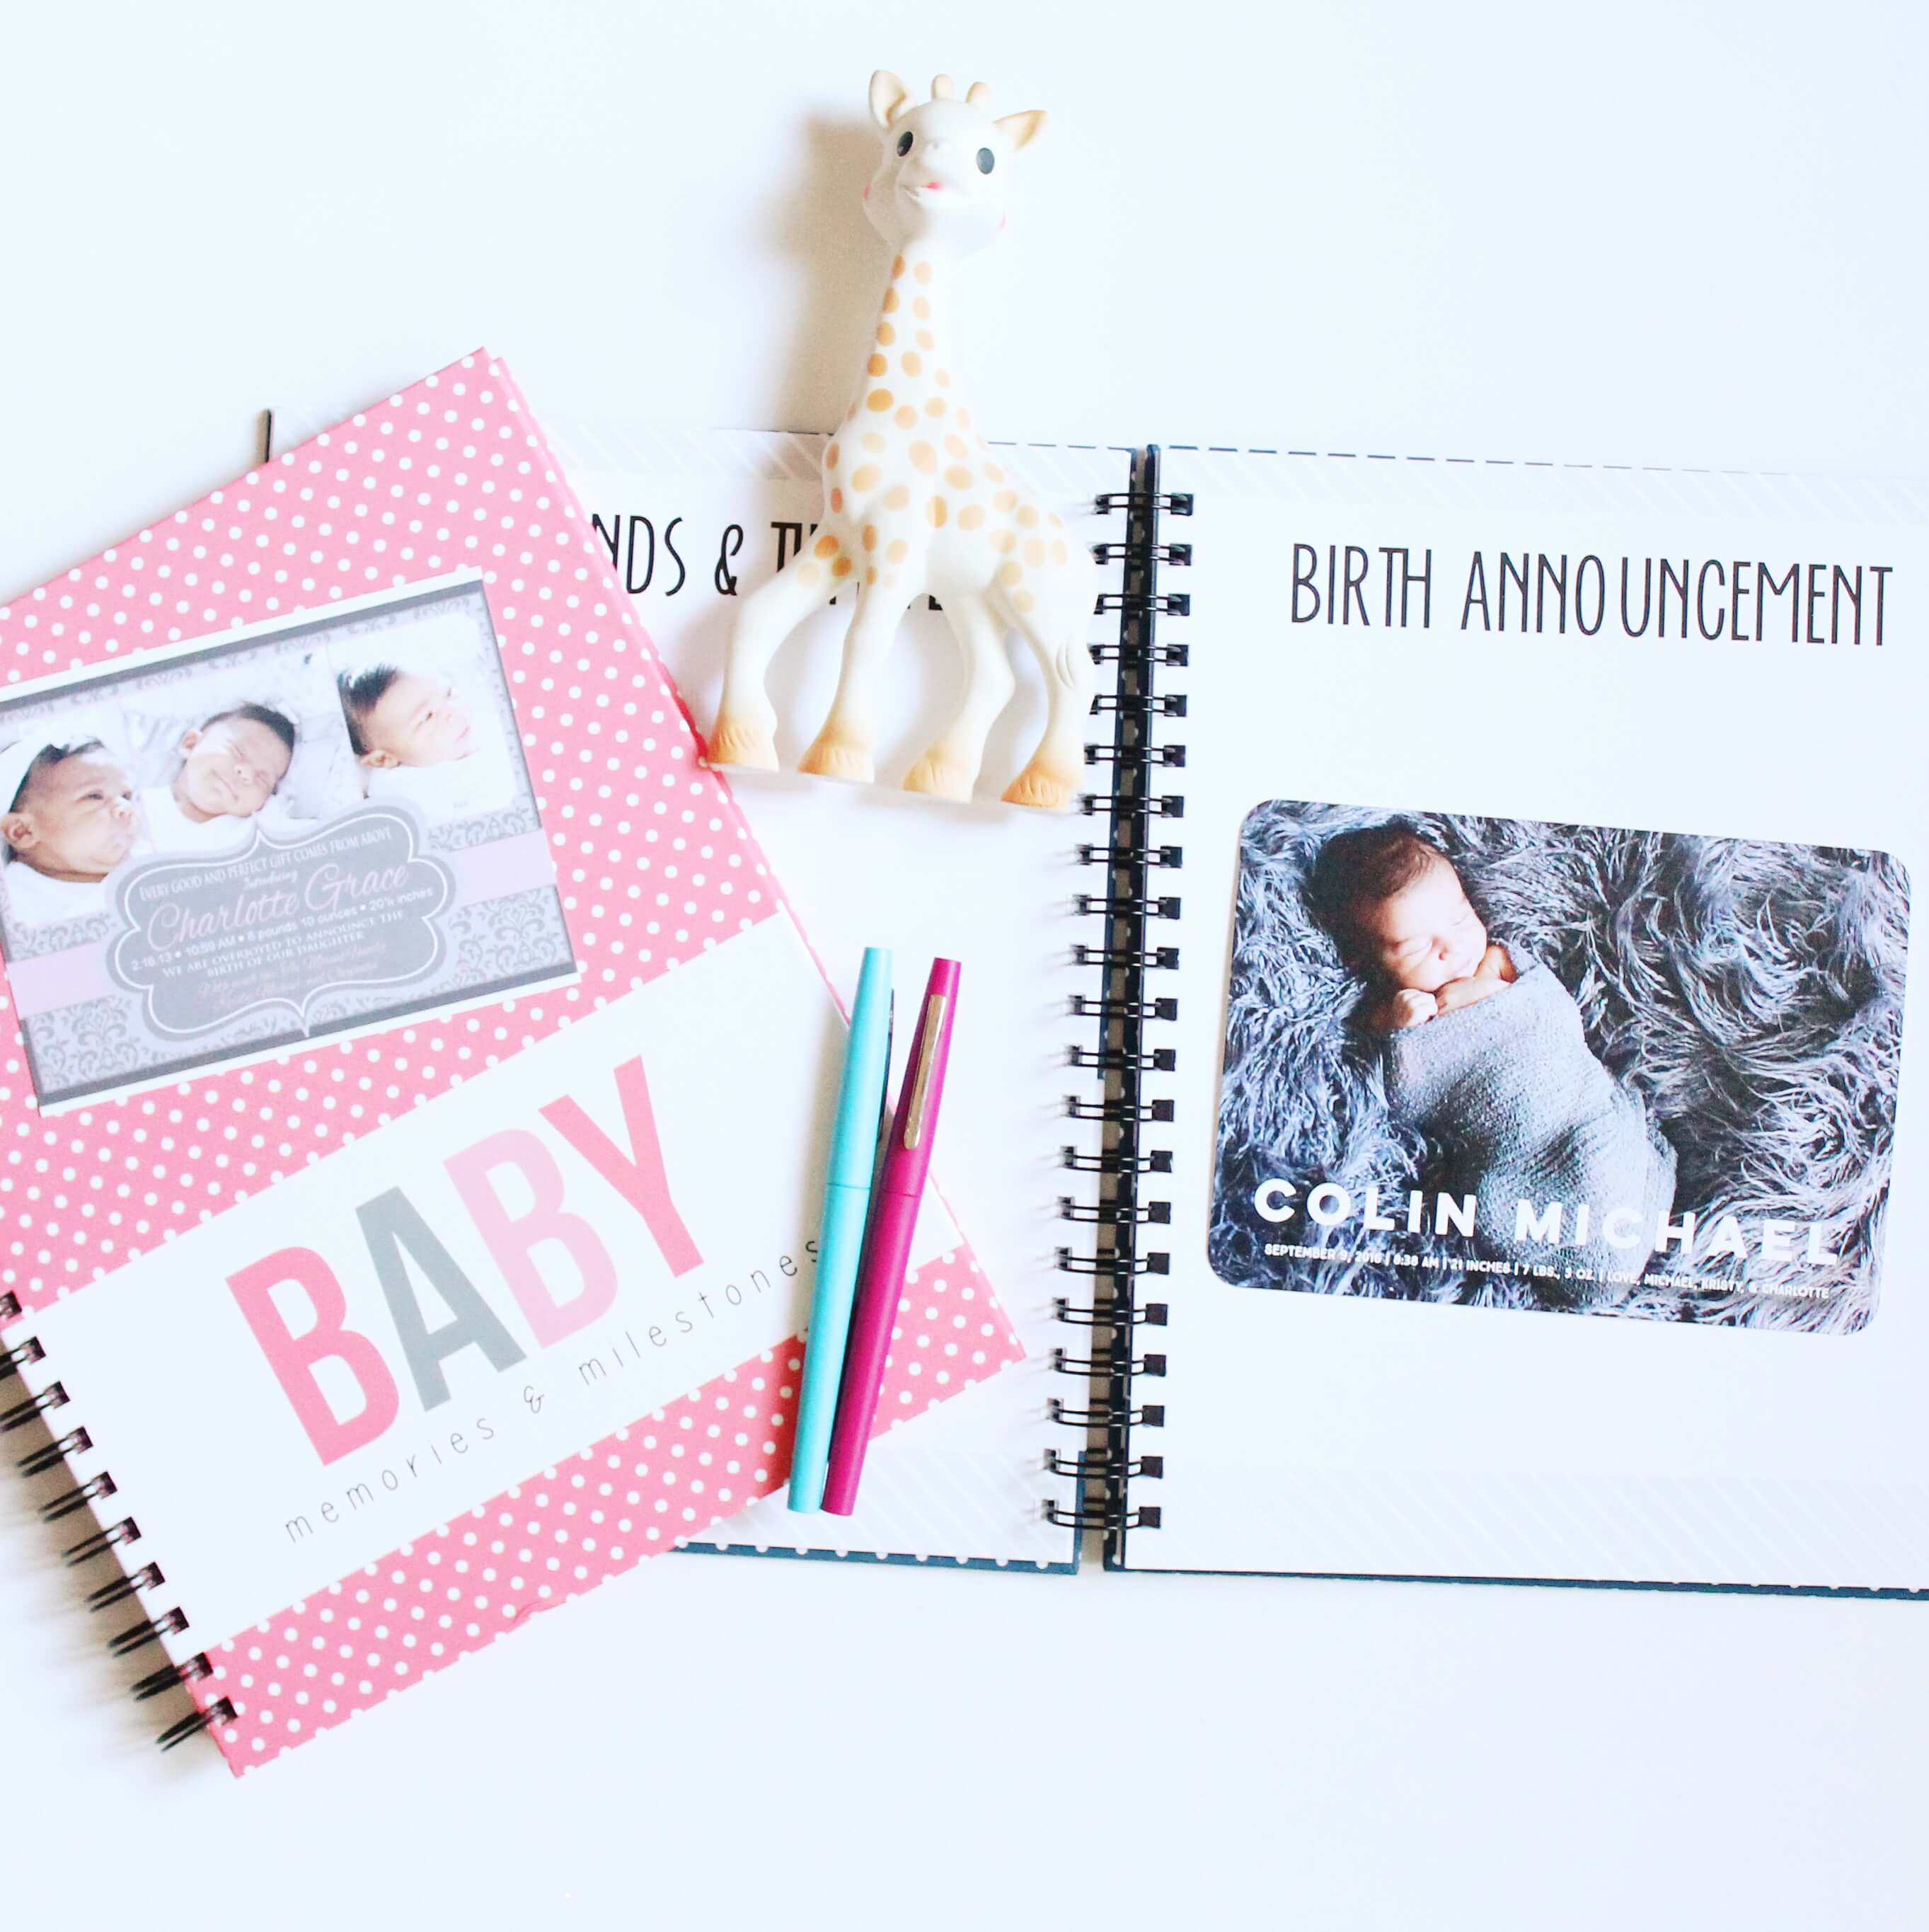 Easy to fill in baby book by Polka Dot Print Shop.